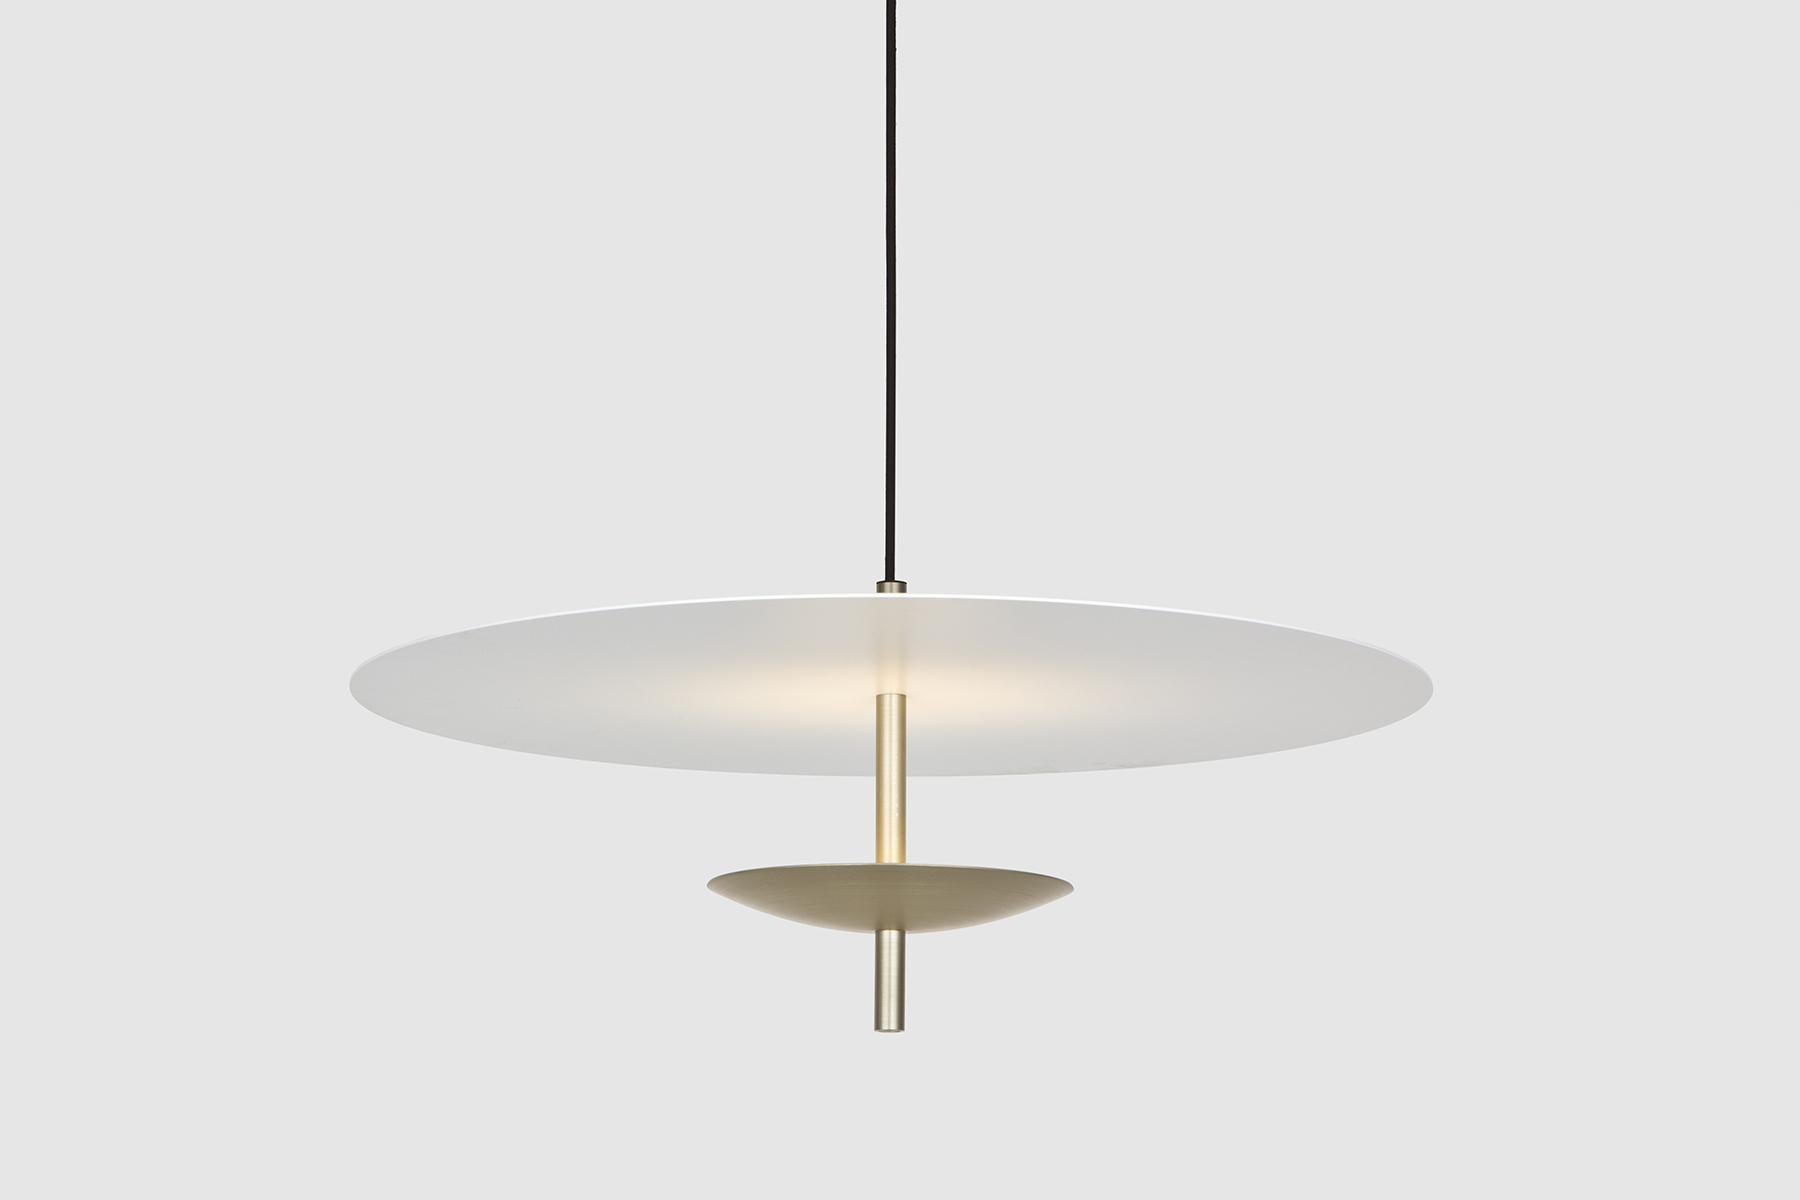 Reflector LED Pendant Light, Bronze Patina, White Shade In New Condition For Sale In Broadmeadows, Victoria